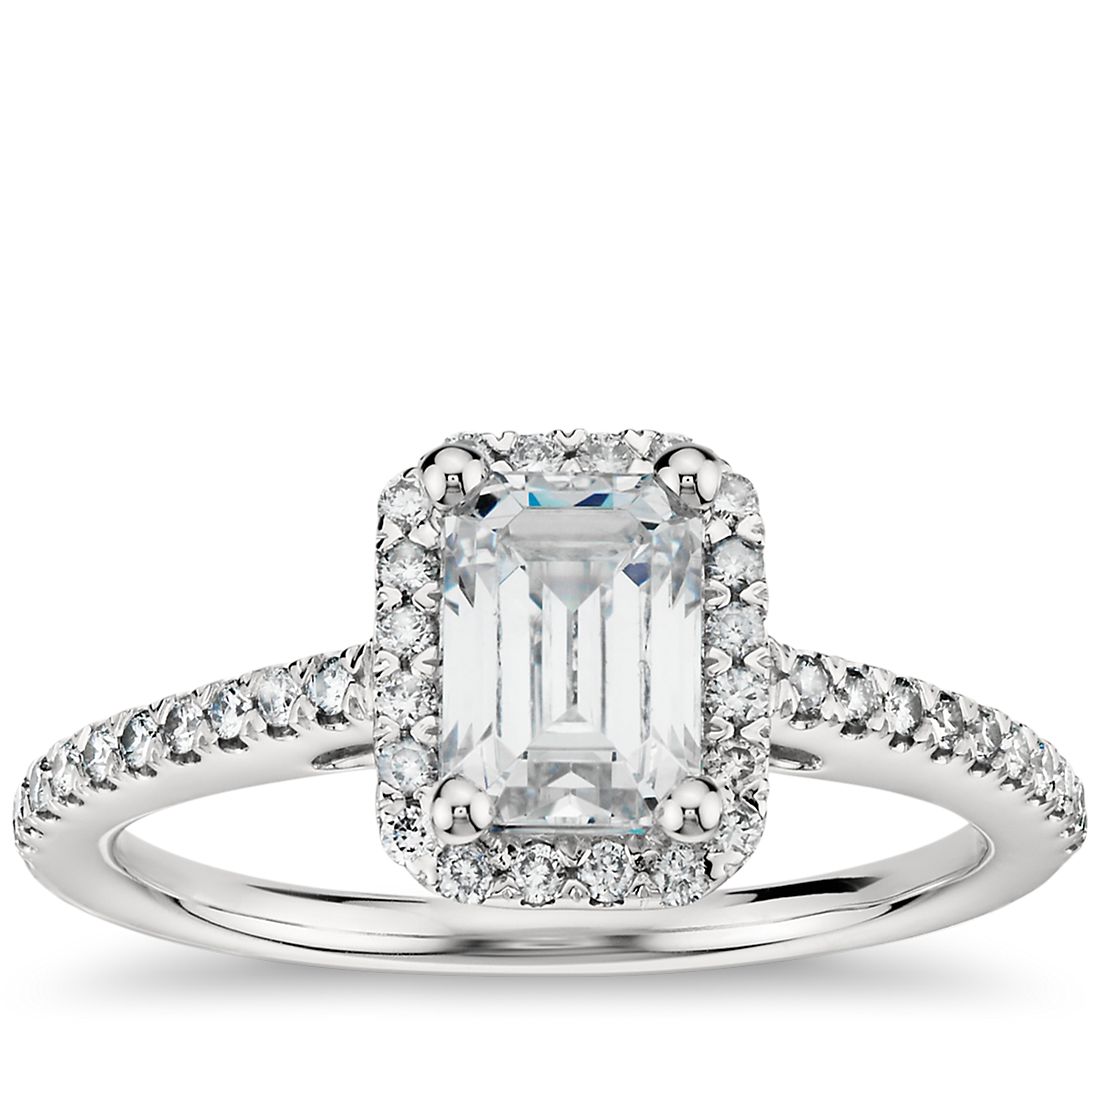 Emerald Cut Halo Diamond Engagement Ring in 14K White Gold | Blue Nile